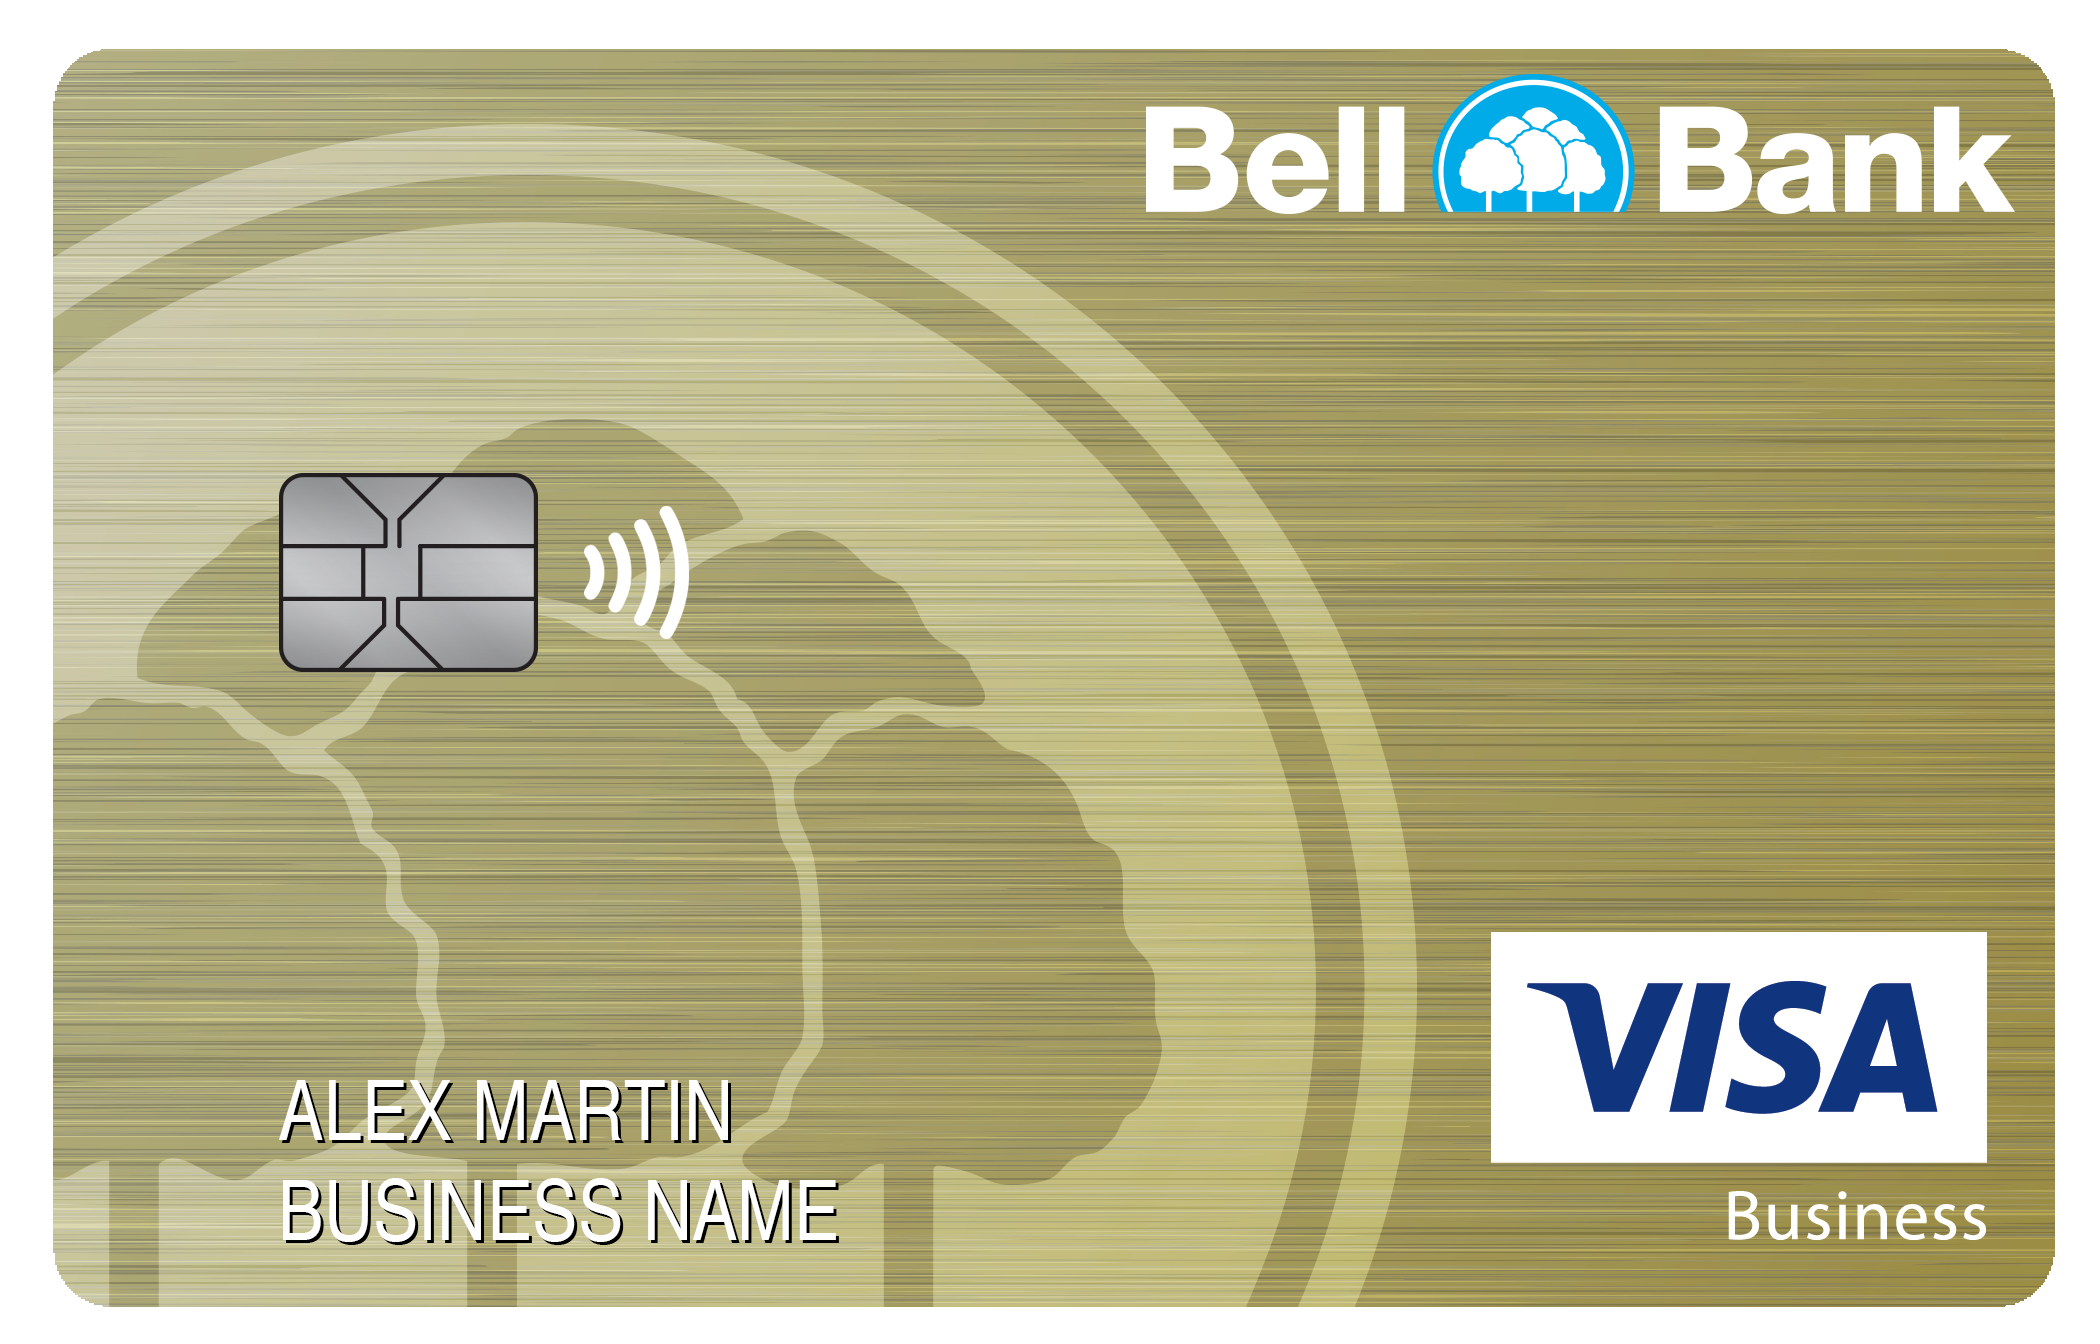 Bell Bank Business Real Rewards Card